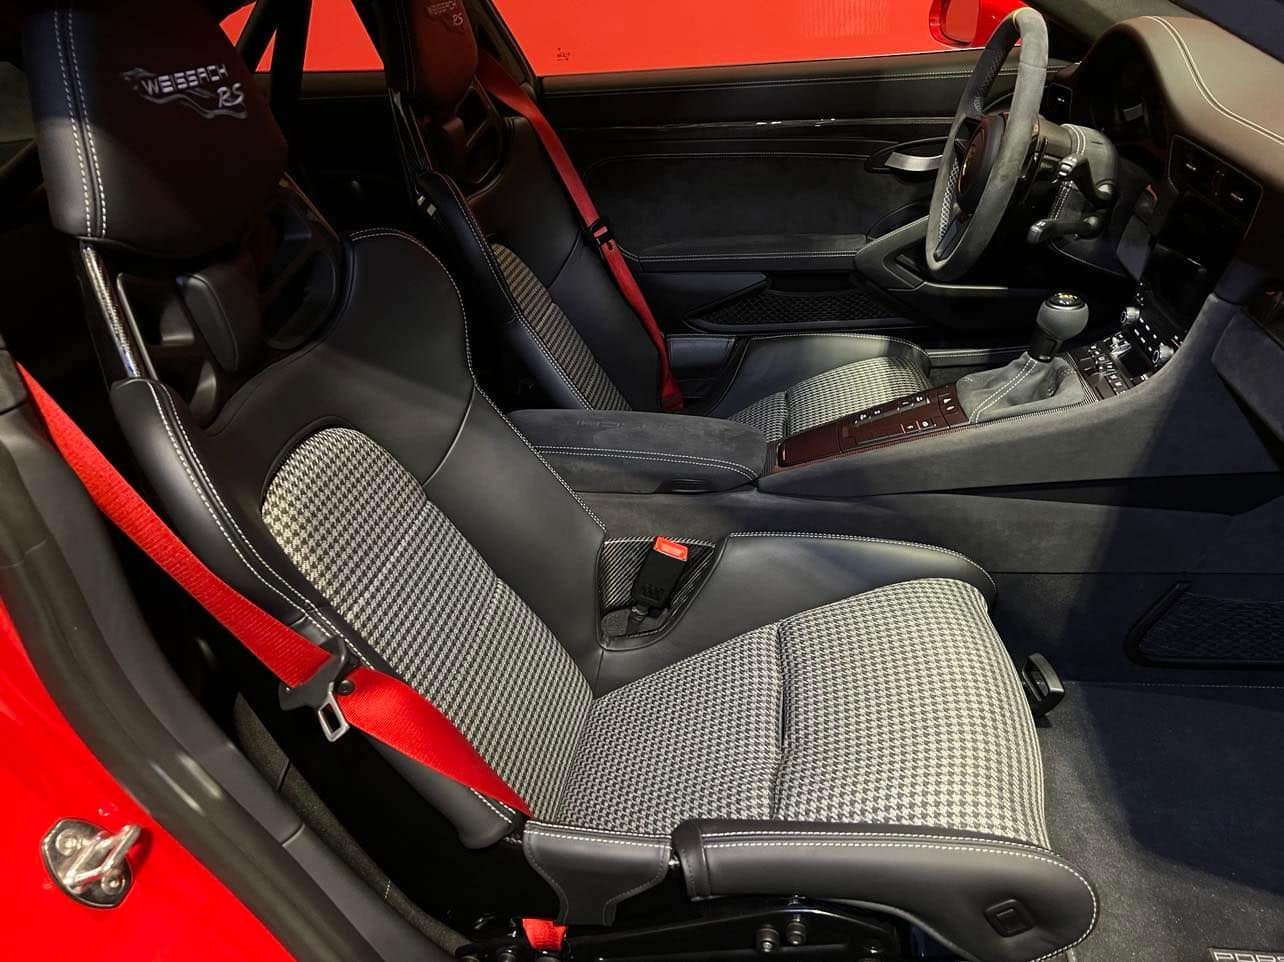 Interior/Upholstery - Black/Silver Pepita (OEM 911R material) memory foam seat cushion set for 991 LWB - Used - 2014 to 2019 Porsche All Models - Clarksburg, MD 20871, United States